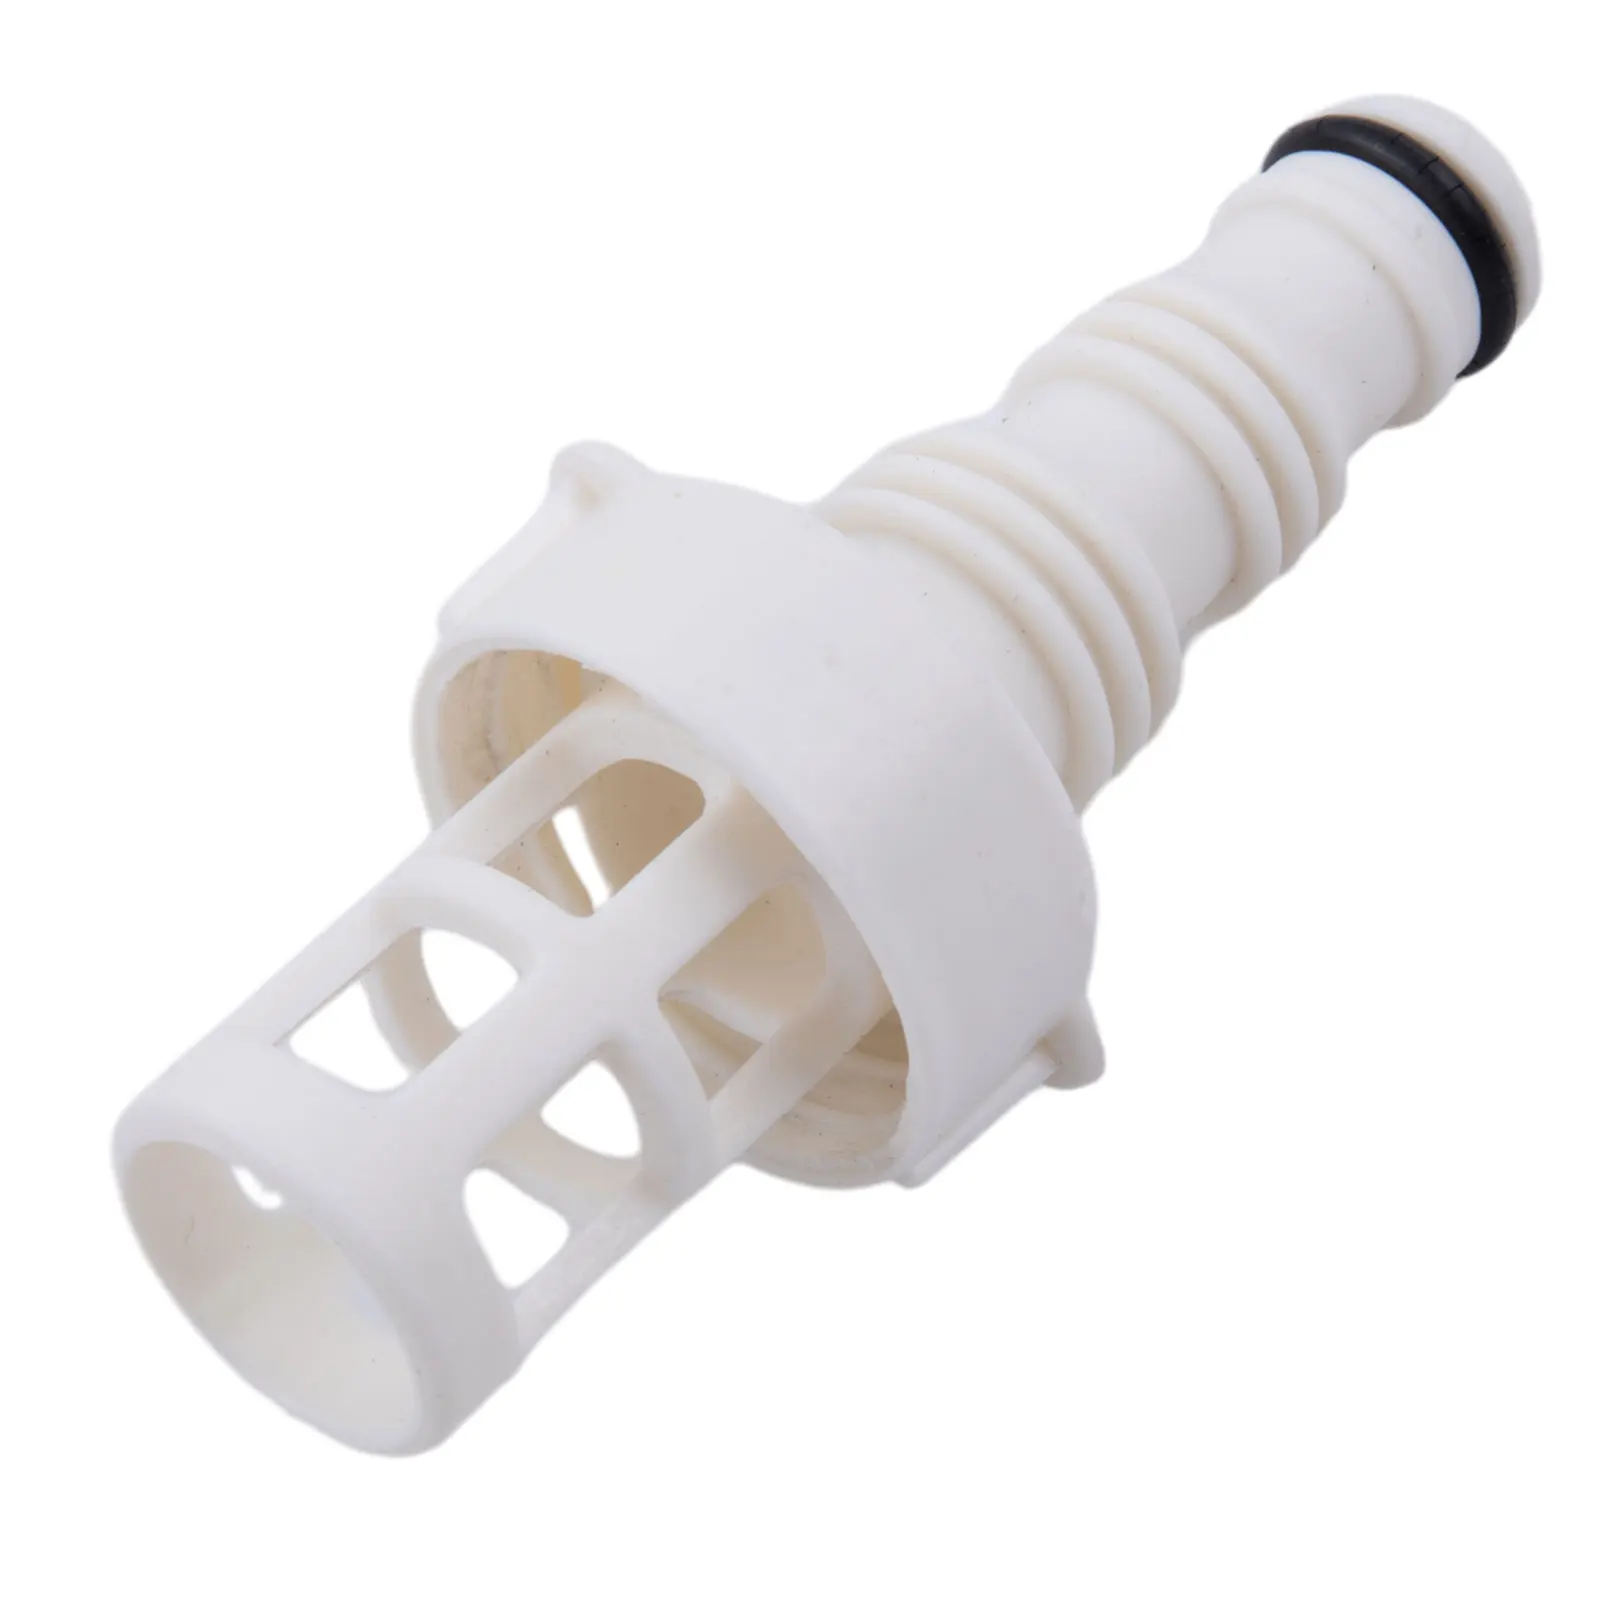 

1Pcs Swimming Pool Adapter For INTEX Adapter Connection To Drainage Device Fit Garden Hose Swimming Pool Drain Connector